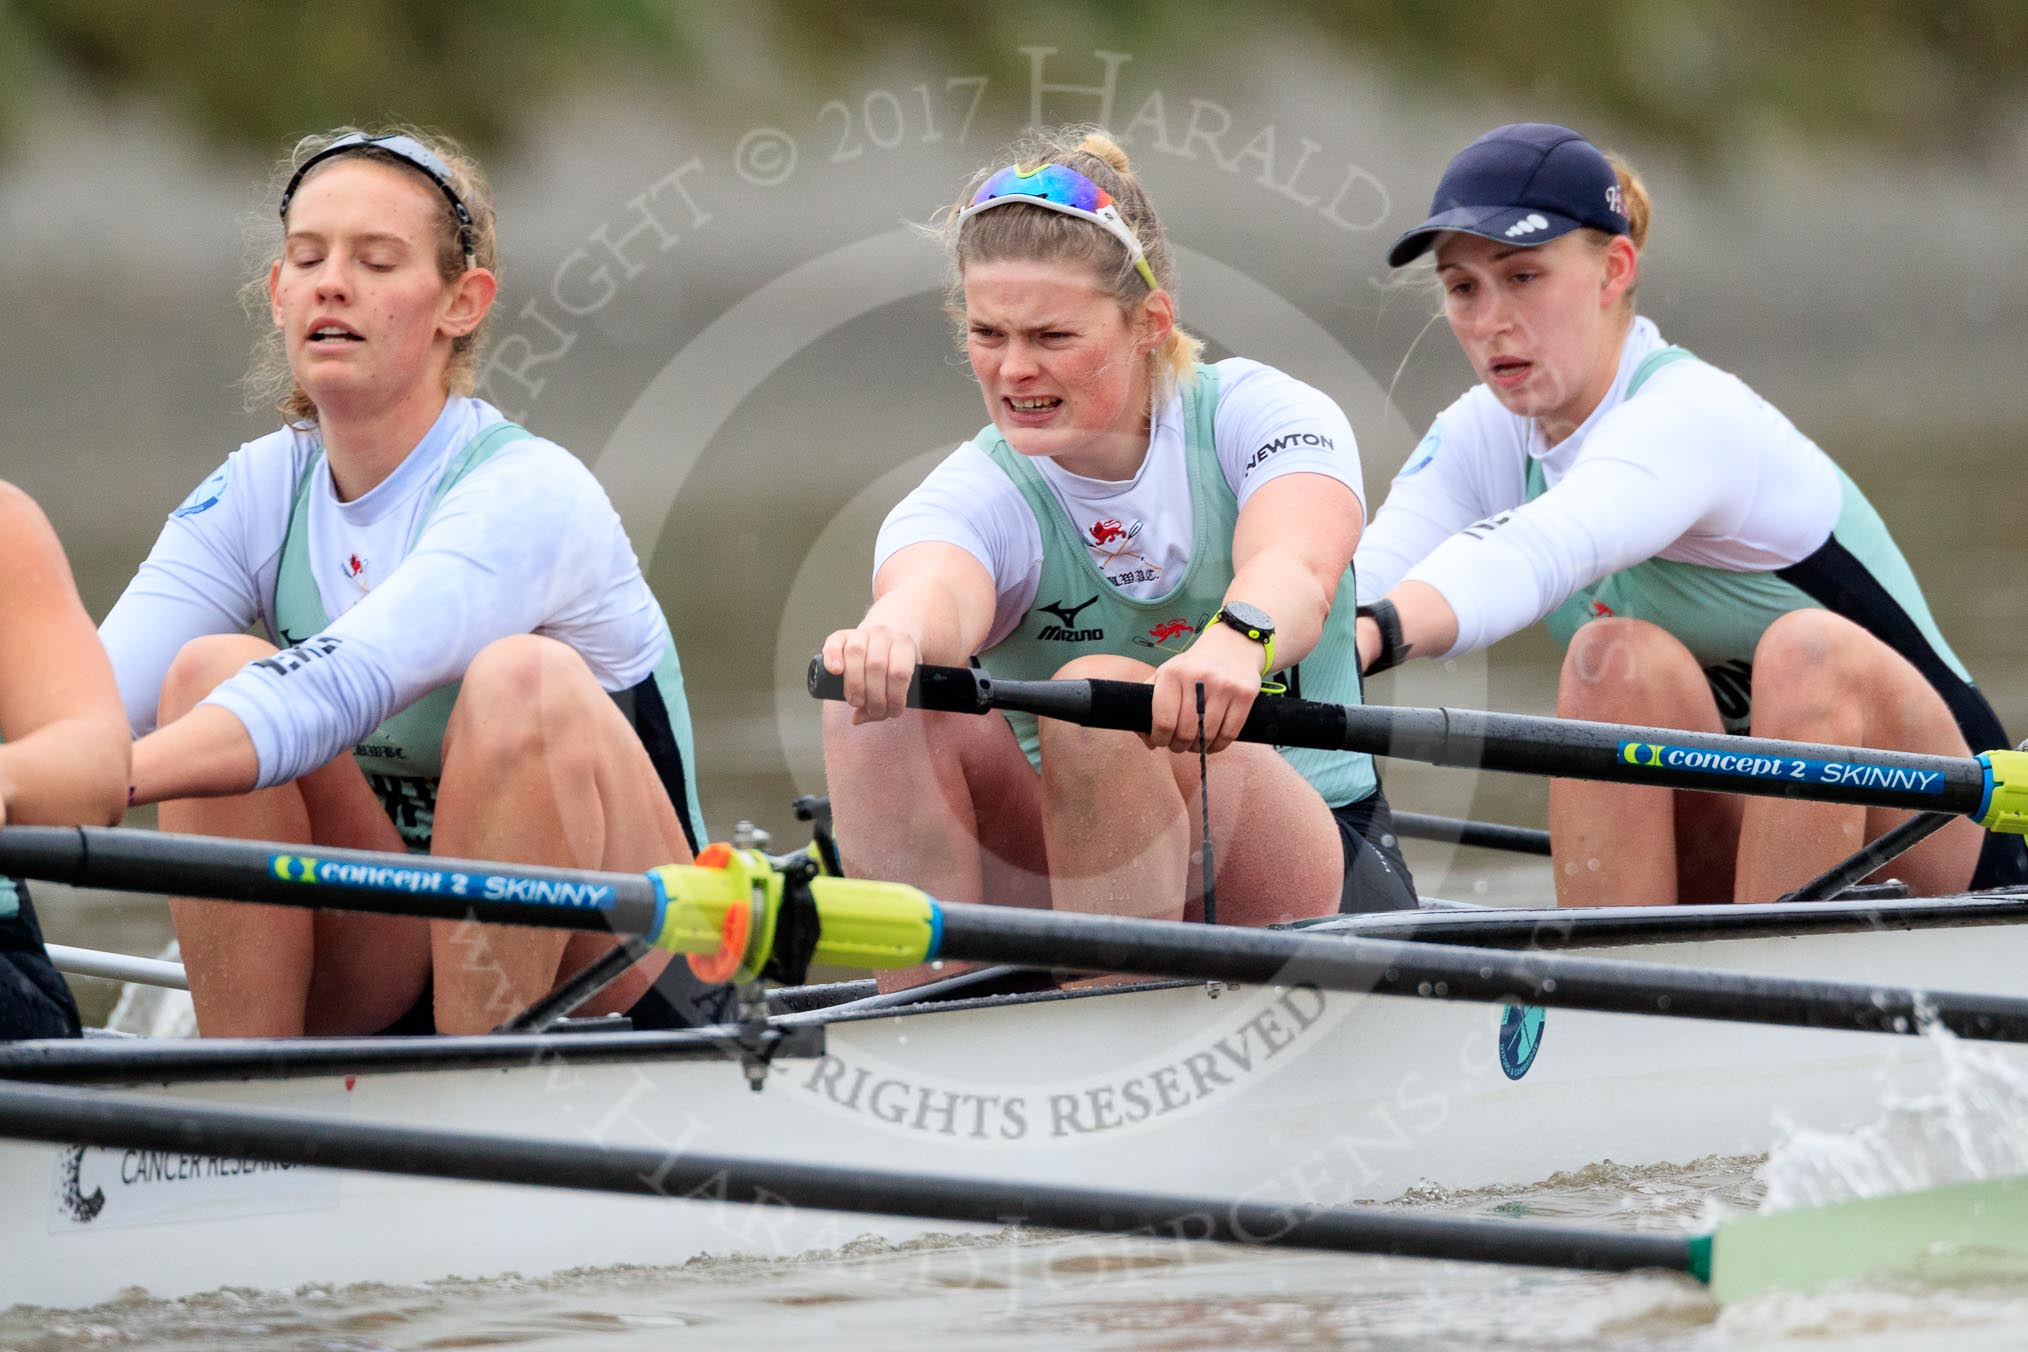 The Boat Race season 2018 - Women's Boat Race Trial Eights (CUWBC, Cambridge): Expecto Patronum  near Hammersmith Bridge, here 4 Laura Foster, 3 Sally O Brien, 2 Millie Perrin.
River Thames between Putney Bridge and Mortlake,
London SW15,

United Kingdom,
on 05 December 2017 at 12:49, image #100